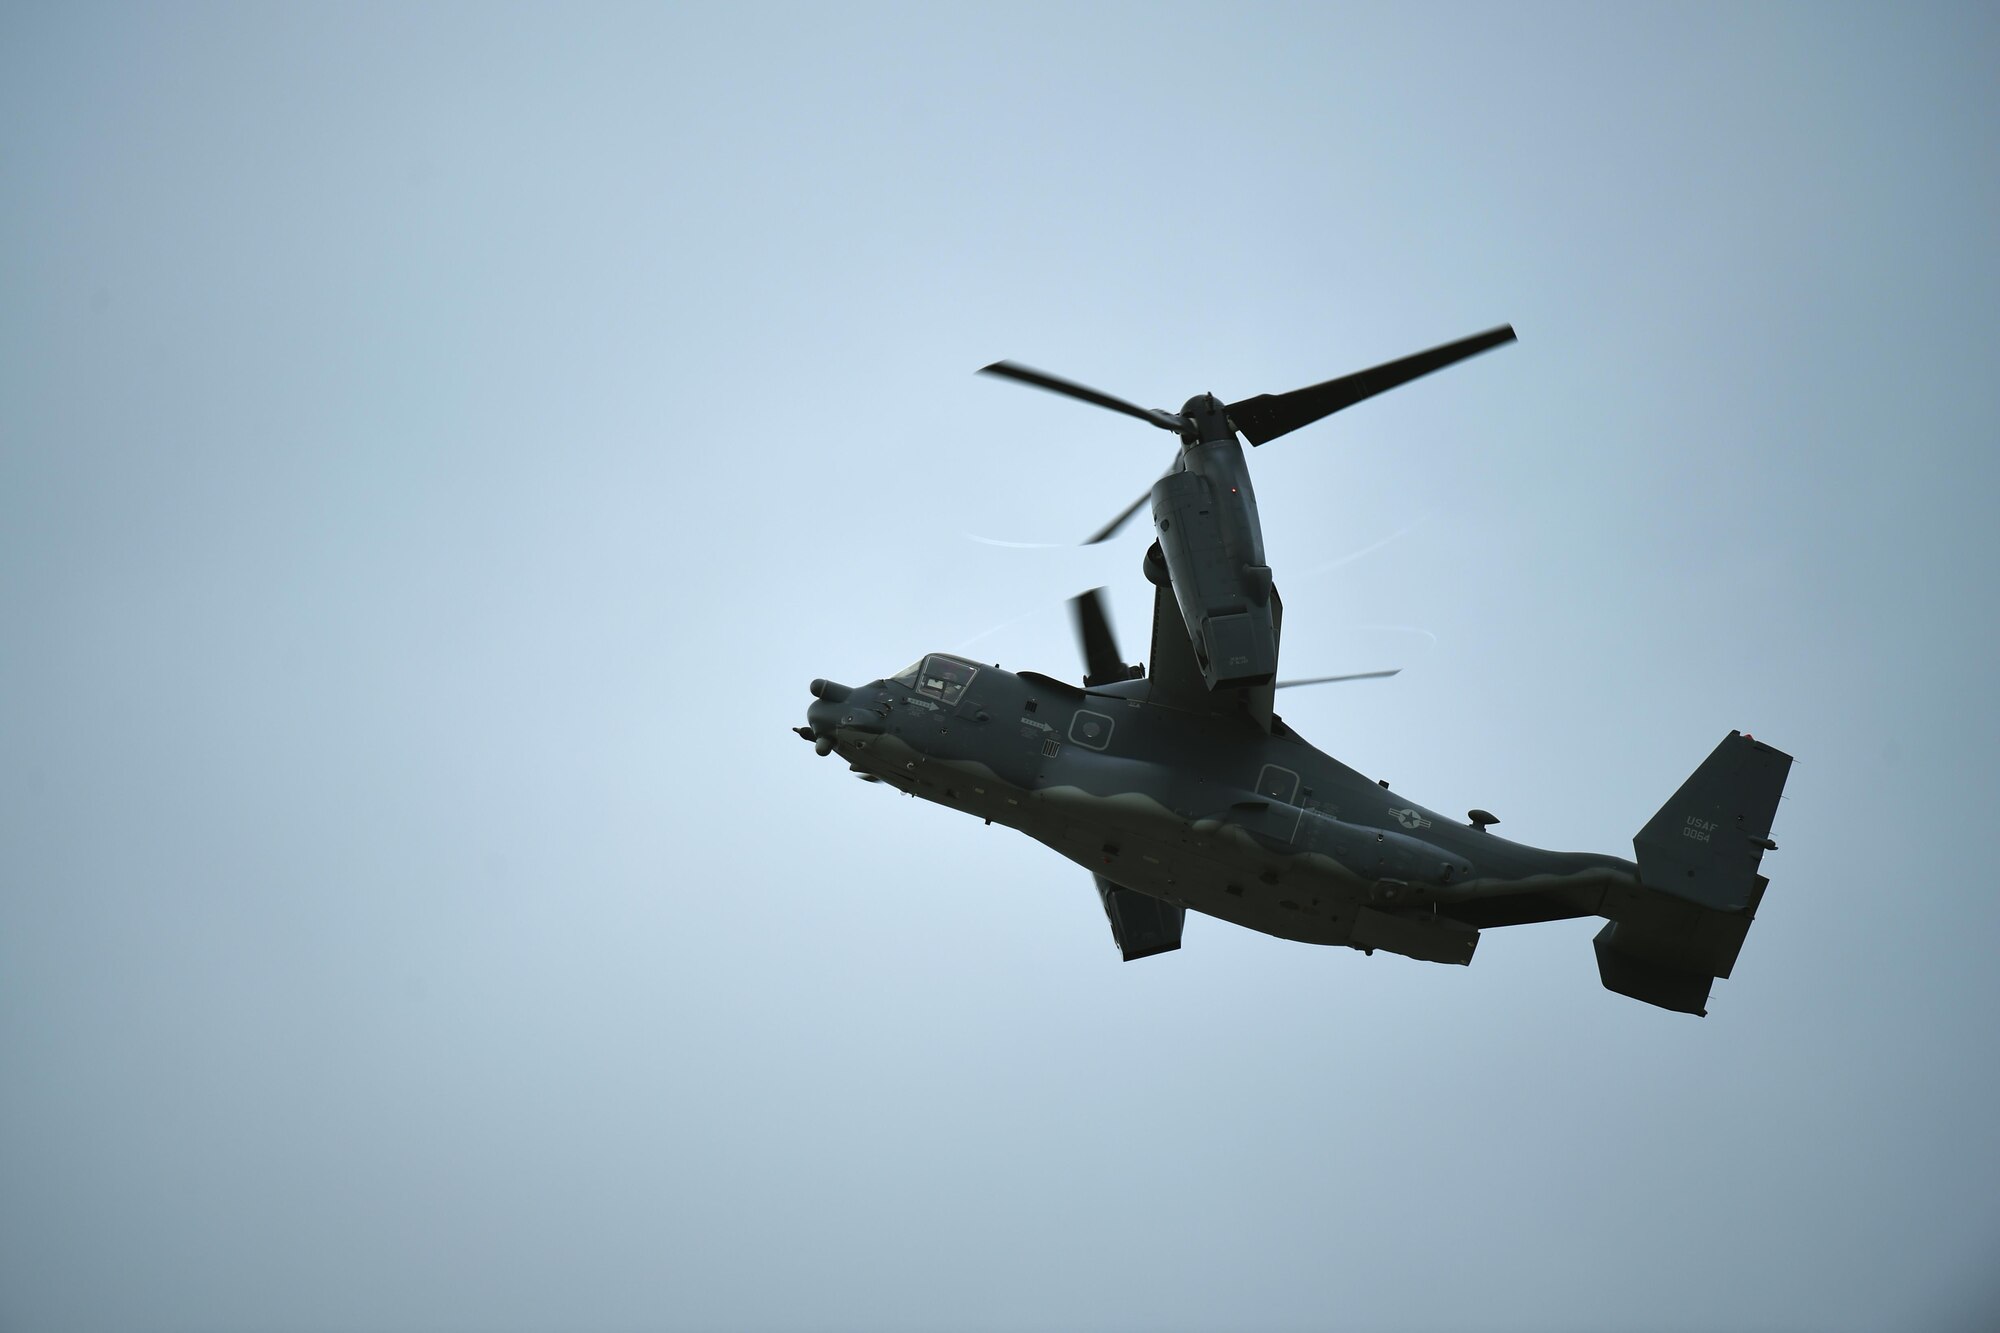 A CV-22 Osprey from RAF Mildenhall, demonstrates it ability to transition from vertical to horizontal flight during the 2016 Royal International Air Tattoo, hosted on RAF Fairford, United Kingdom, July 8-10, 2016. RIAT 16 afforded an opportunity for new aircraft, like the F-35 Lightning II, to be displayed alongside crowd favorites and provided a weekend of fun and entertainment for the projected 160,000 visitors. (U.S. Air Force photo by Airman 1st Class Zachary Bumpus/Released)